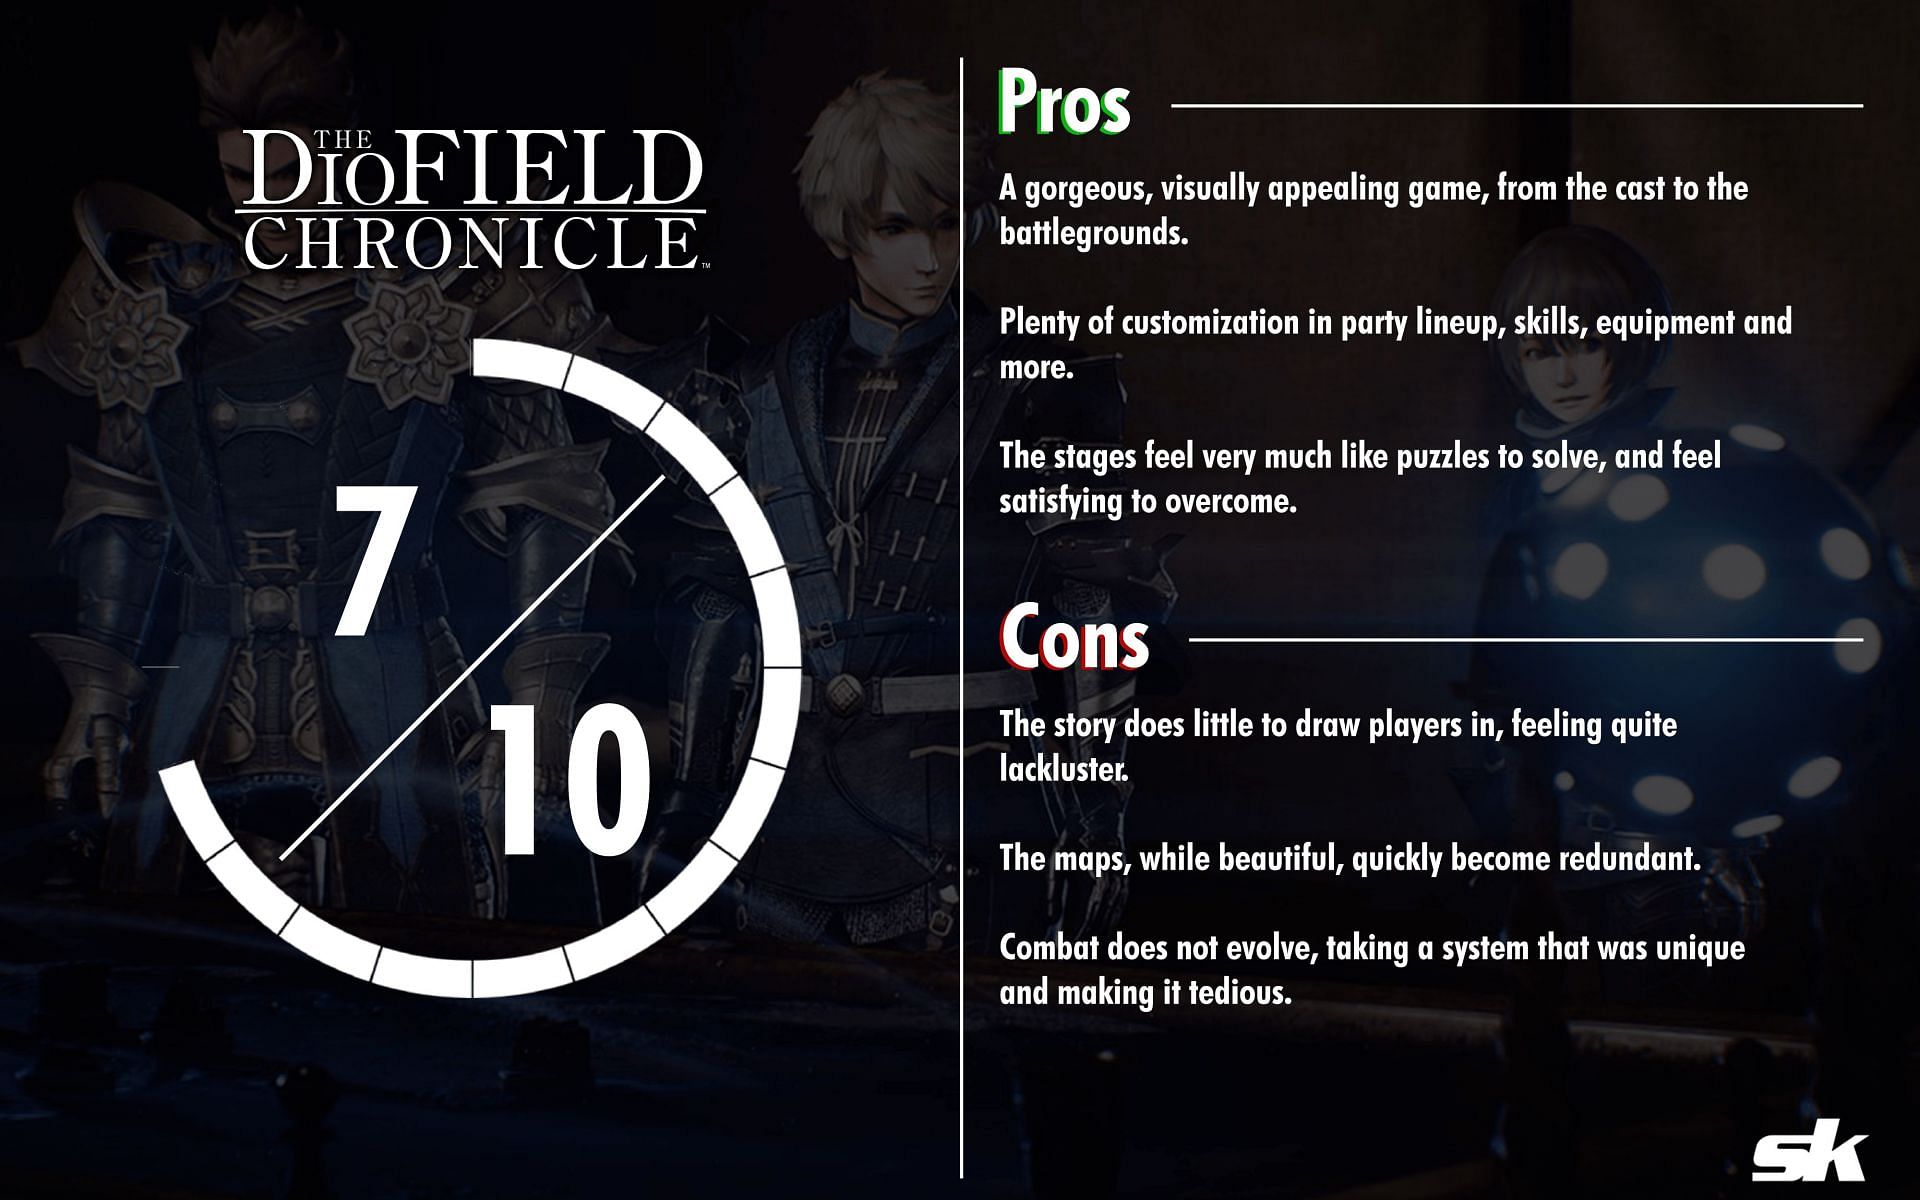 The DioField Chronicle has some great ideas but executes them poorly (Image via Sportskeeda)